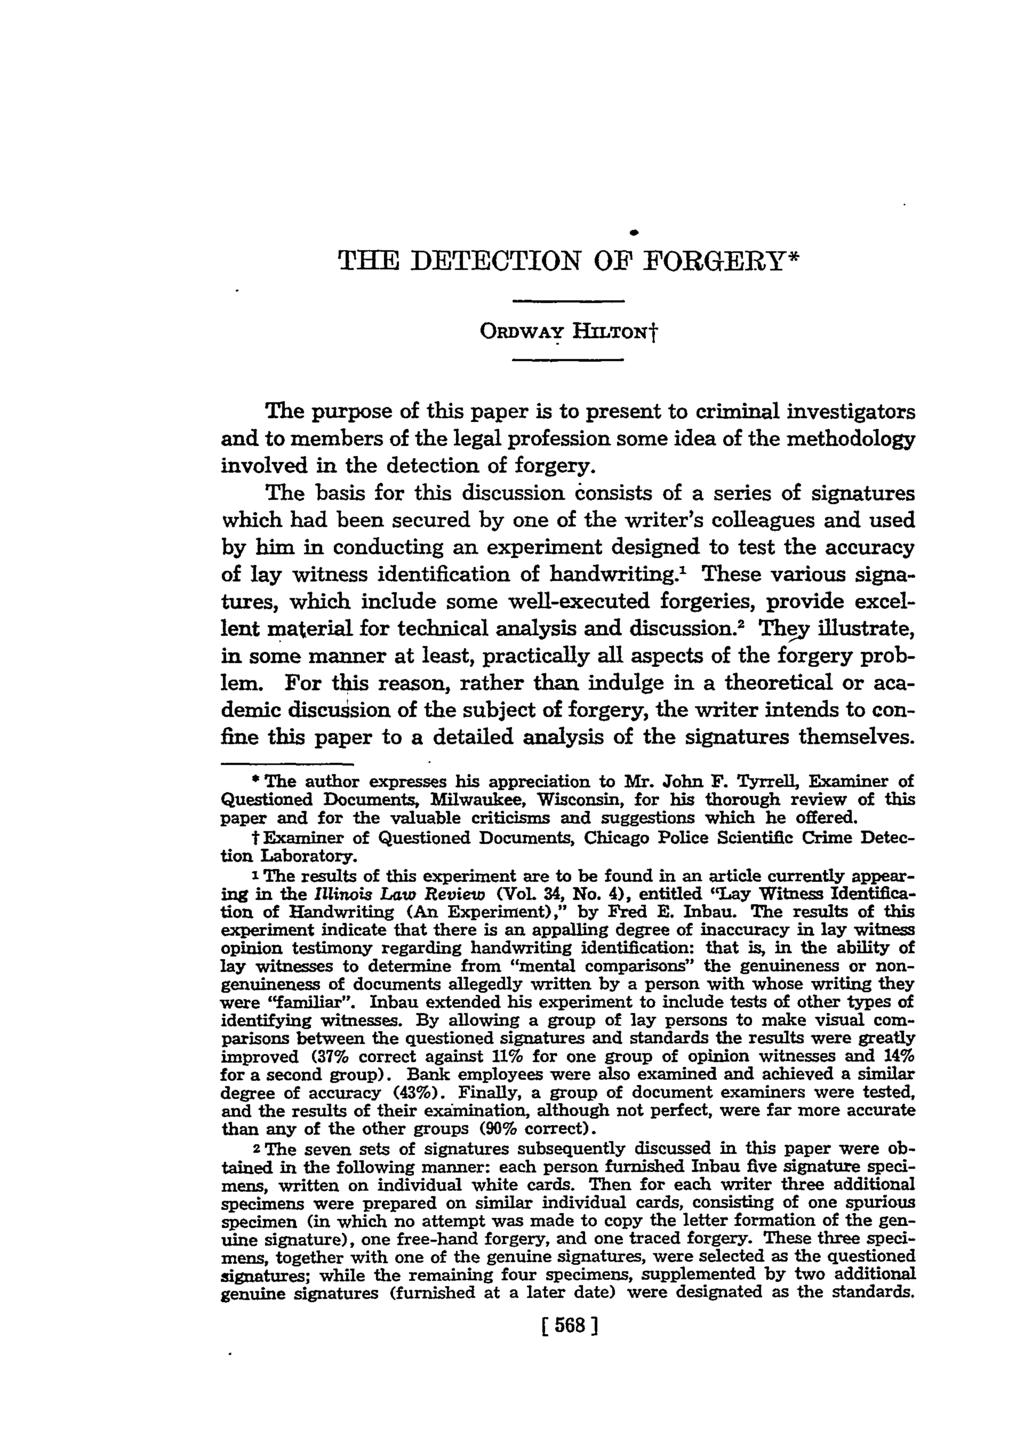 0 THE DETECTION OF FORGERY* ORDWAY HiTOxt The purpose of this paper is to present to criminal investigators and to members of the legal profession some idea of the methodology involved in the